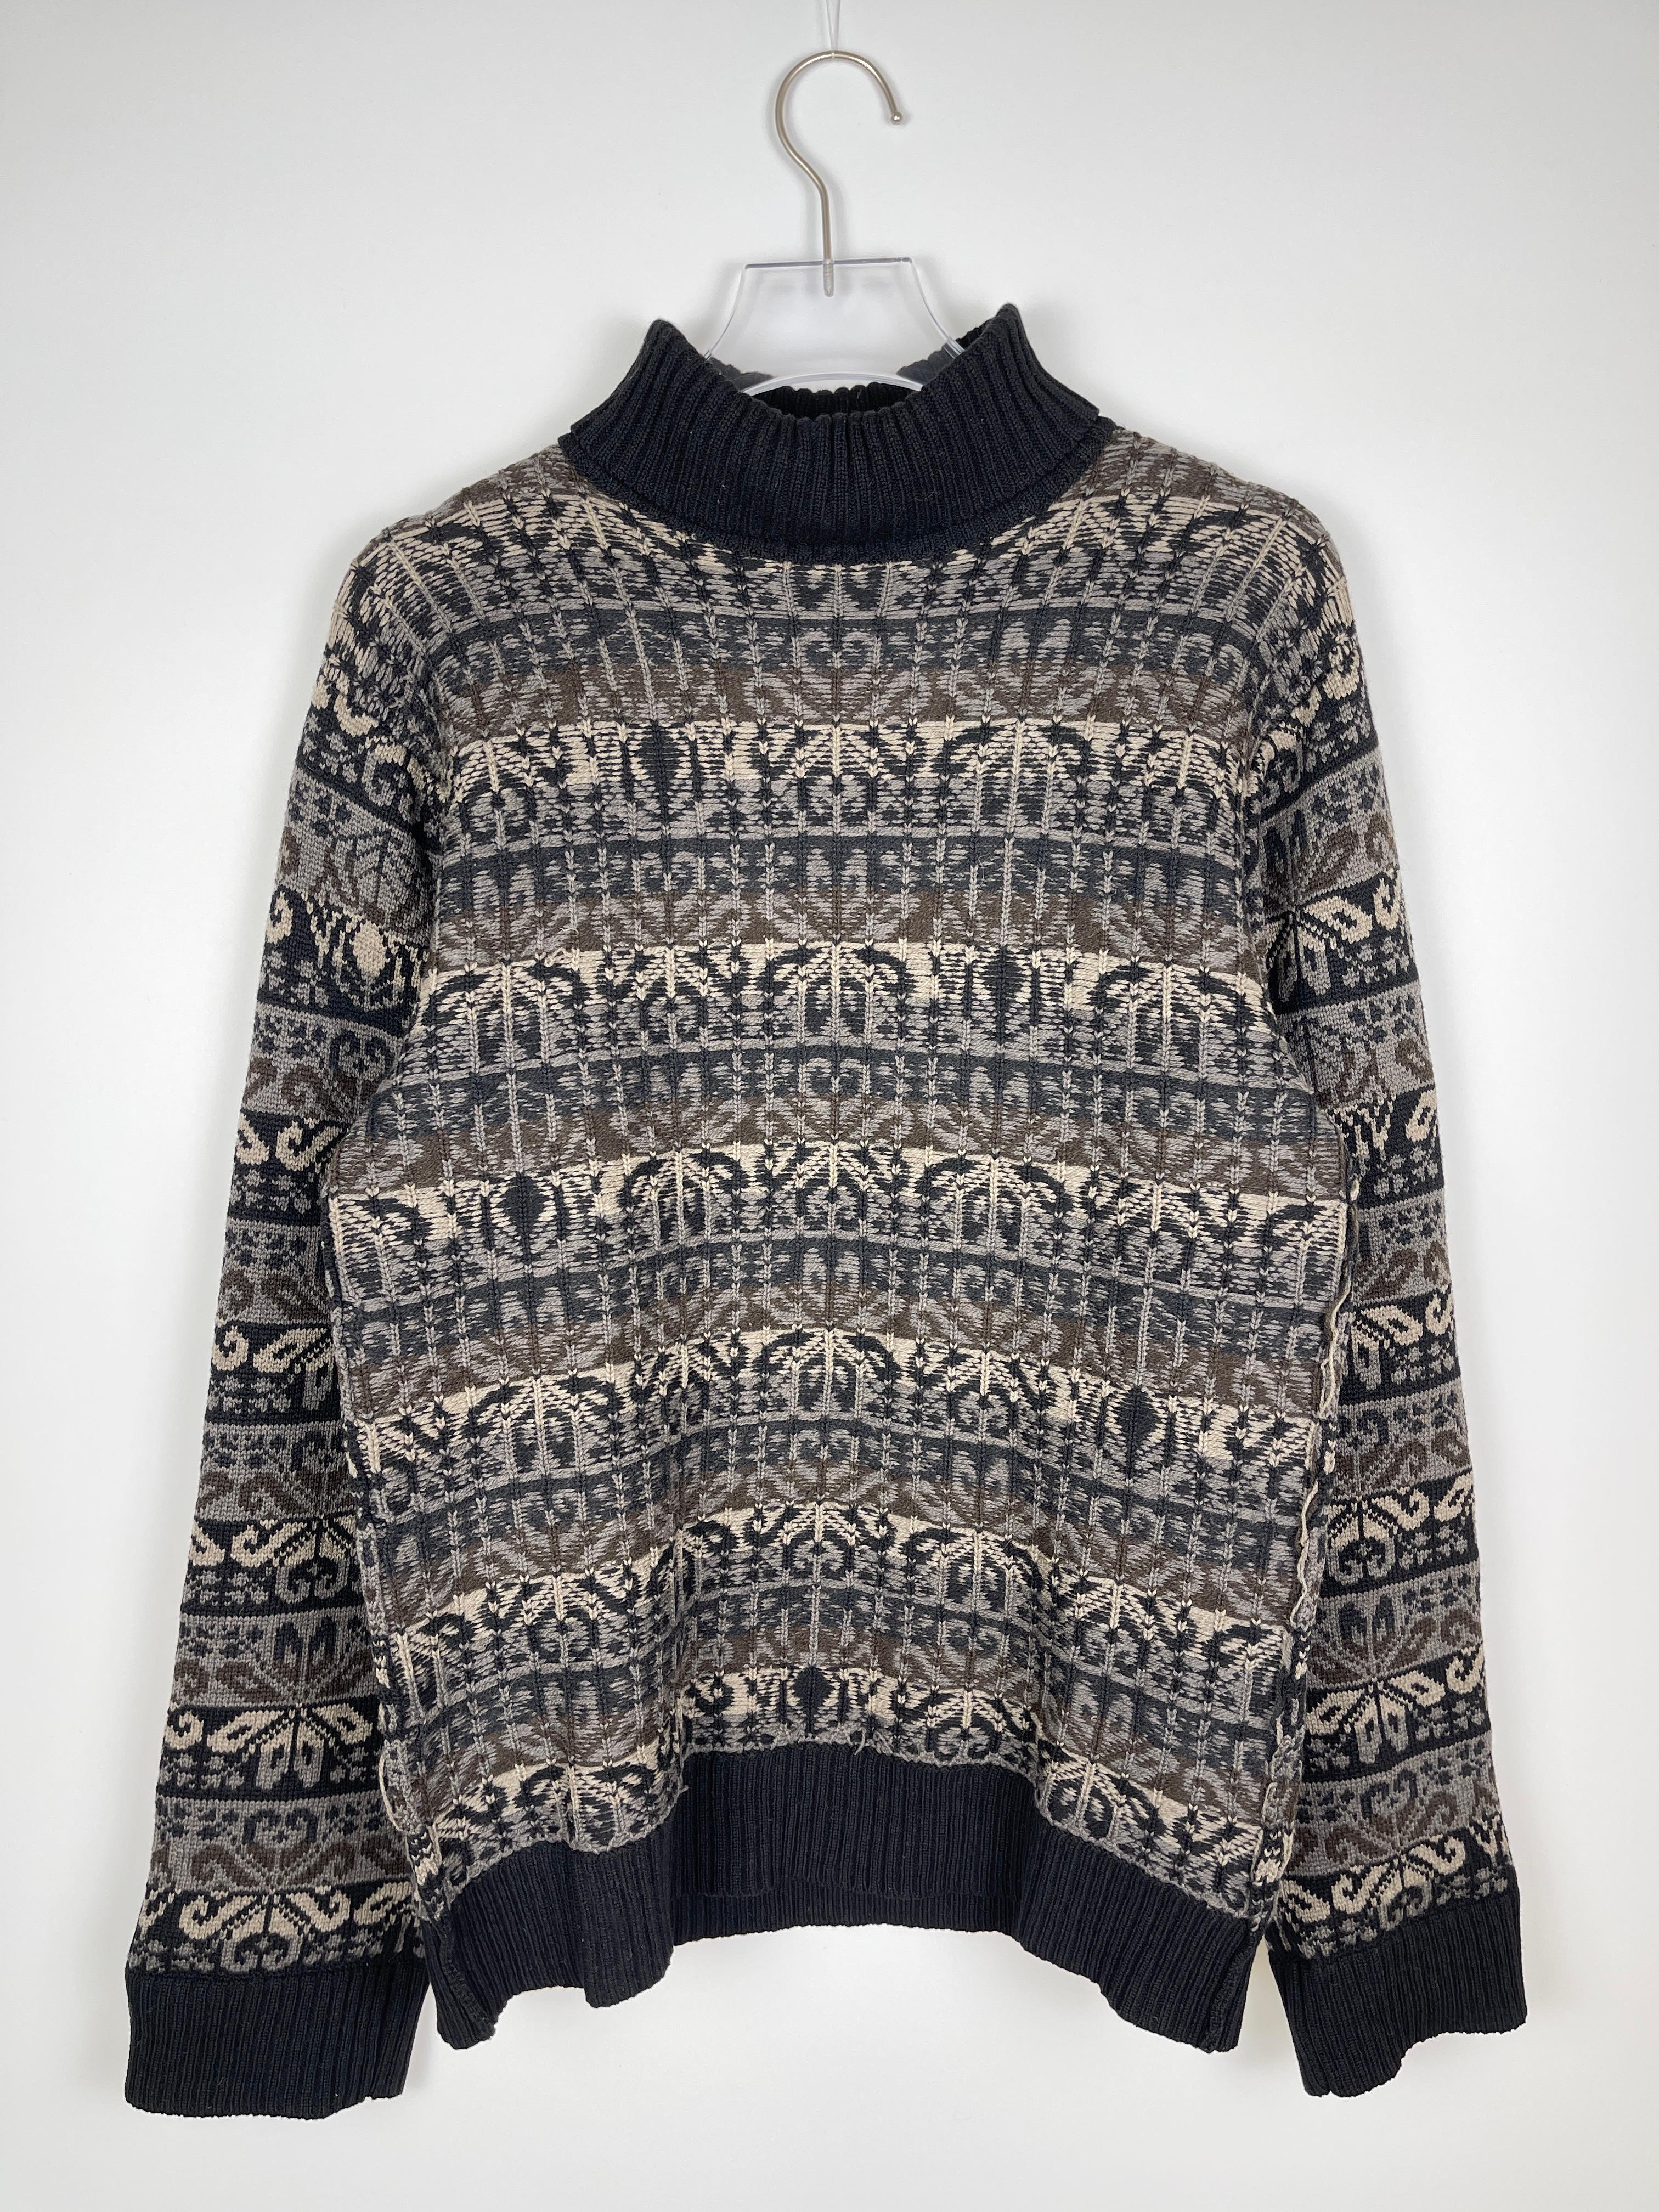 Yohji Yamamoto Pour Homme Intarsia Floral Sweater  For Sale 4